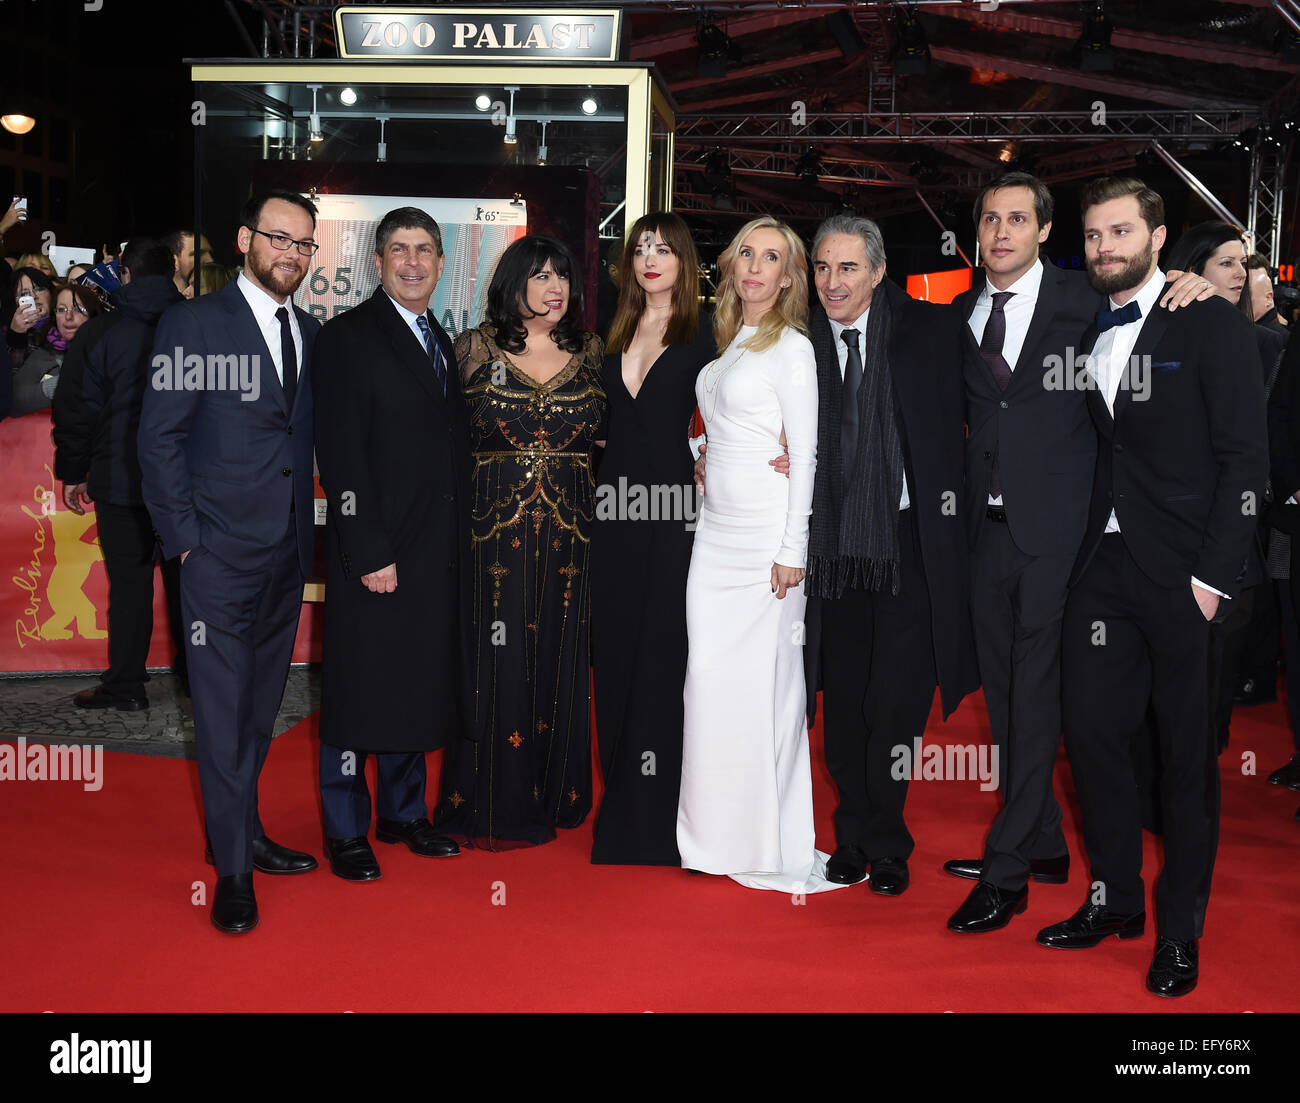 Berlin, Germany. 11th Feb, 2015. Producer Dana Brunetti (l-r), a guest, bestselling author E.L. James, actress Dakota Johnson, director Sam Taylor-Johnson and producer Marcus Viscidi, a guest, and actor Jamie Doran arrive at the world premiere of the film 'Fifty Shades of Grey' during the 65th annual Berlin Film Festival, in Berlin, Germany, 11 February 2015. The movie is presented out of competition at the Berlinale, which runs from 05 to 15 February 2015. Photo: Britta Pedersen/dpa (recrop)/dpa/Alamy Live News Credit:  dpa picture alliance/Alamy Live News Stock Photo